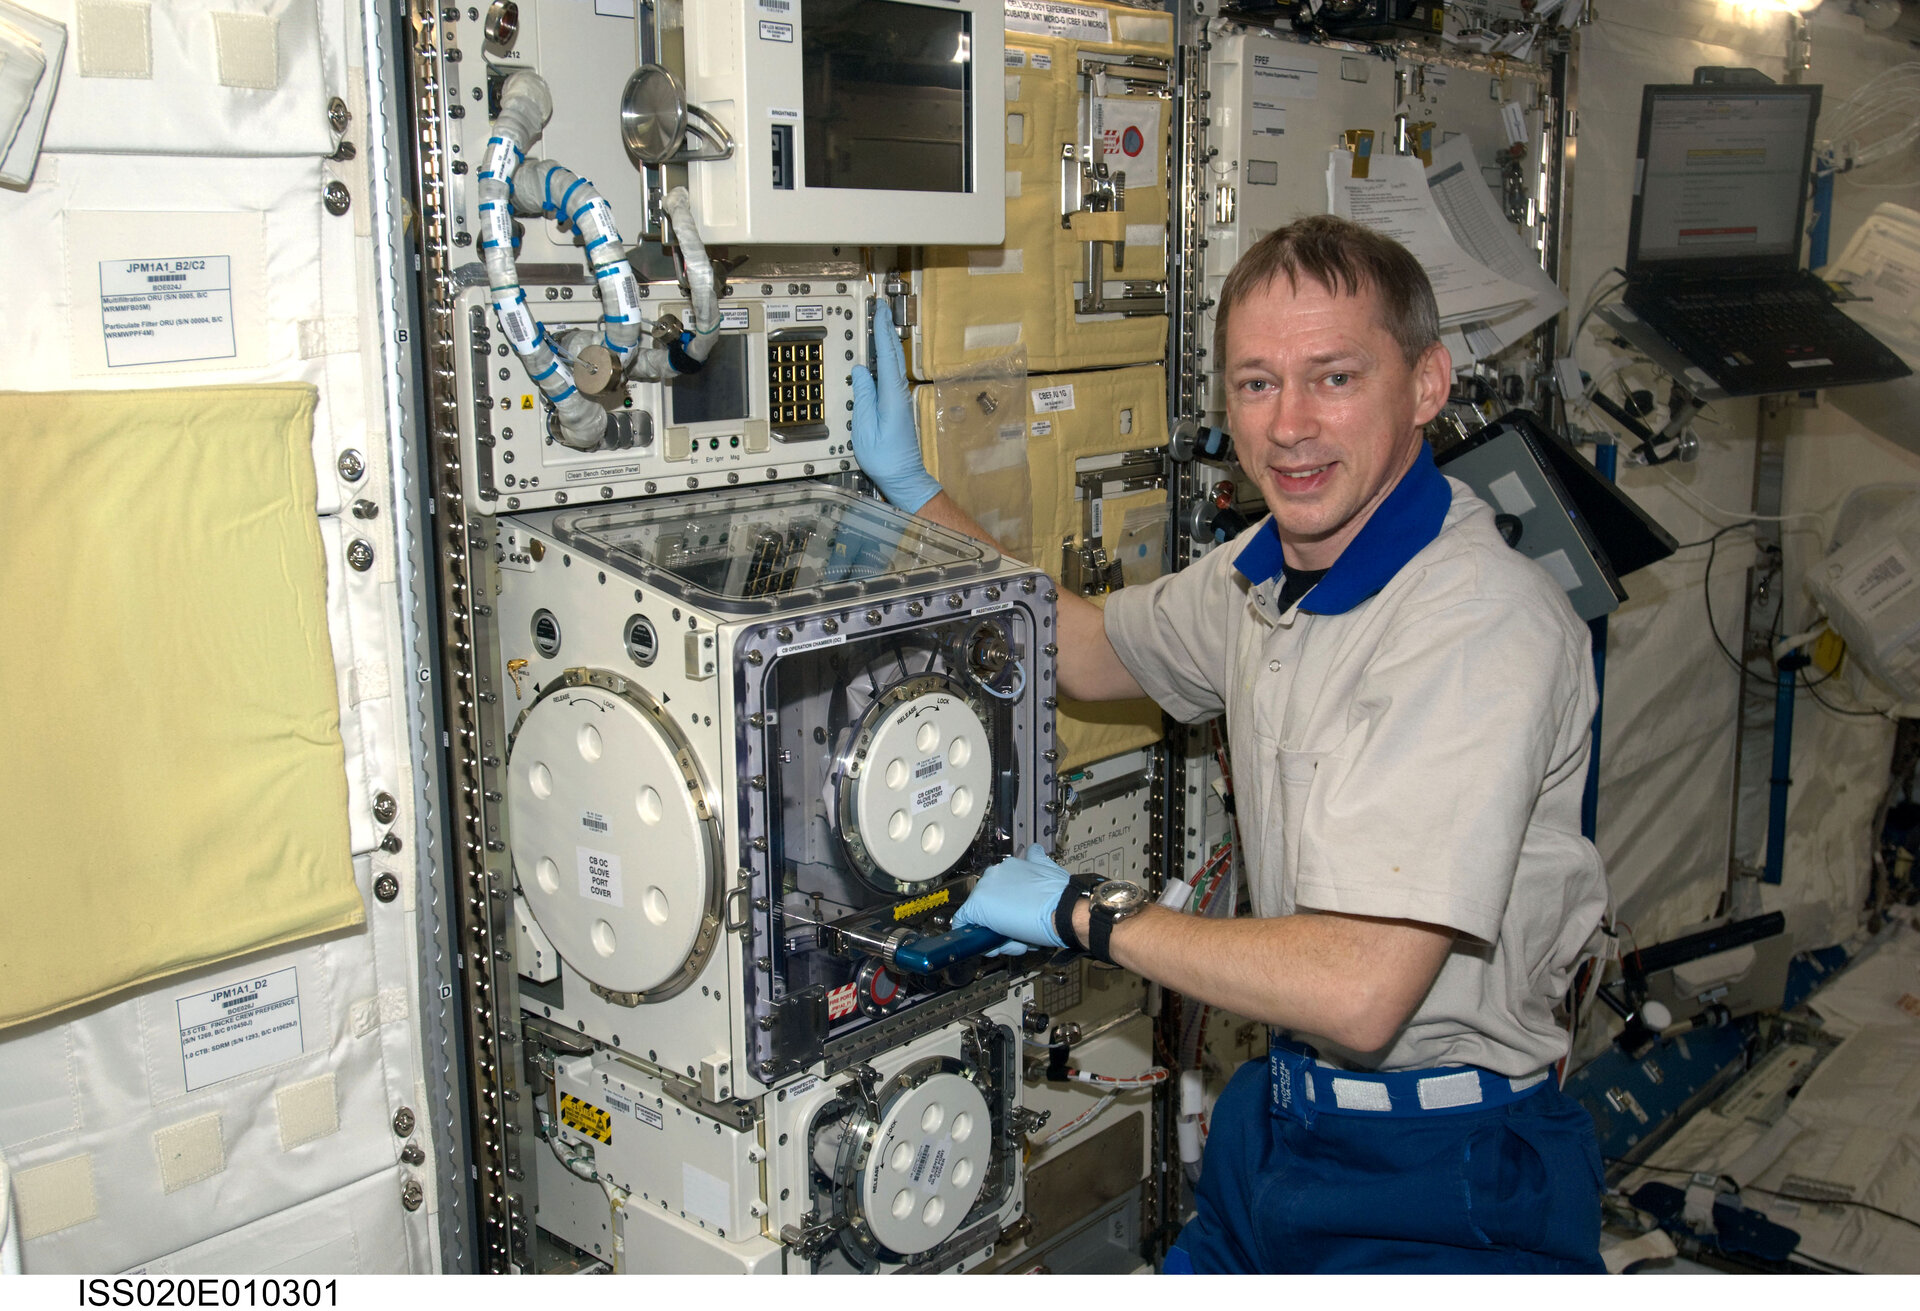 Frank De Winne answers your questions from space